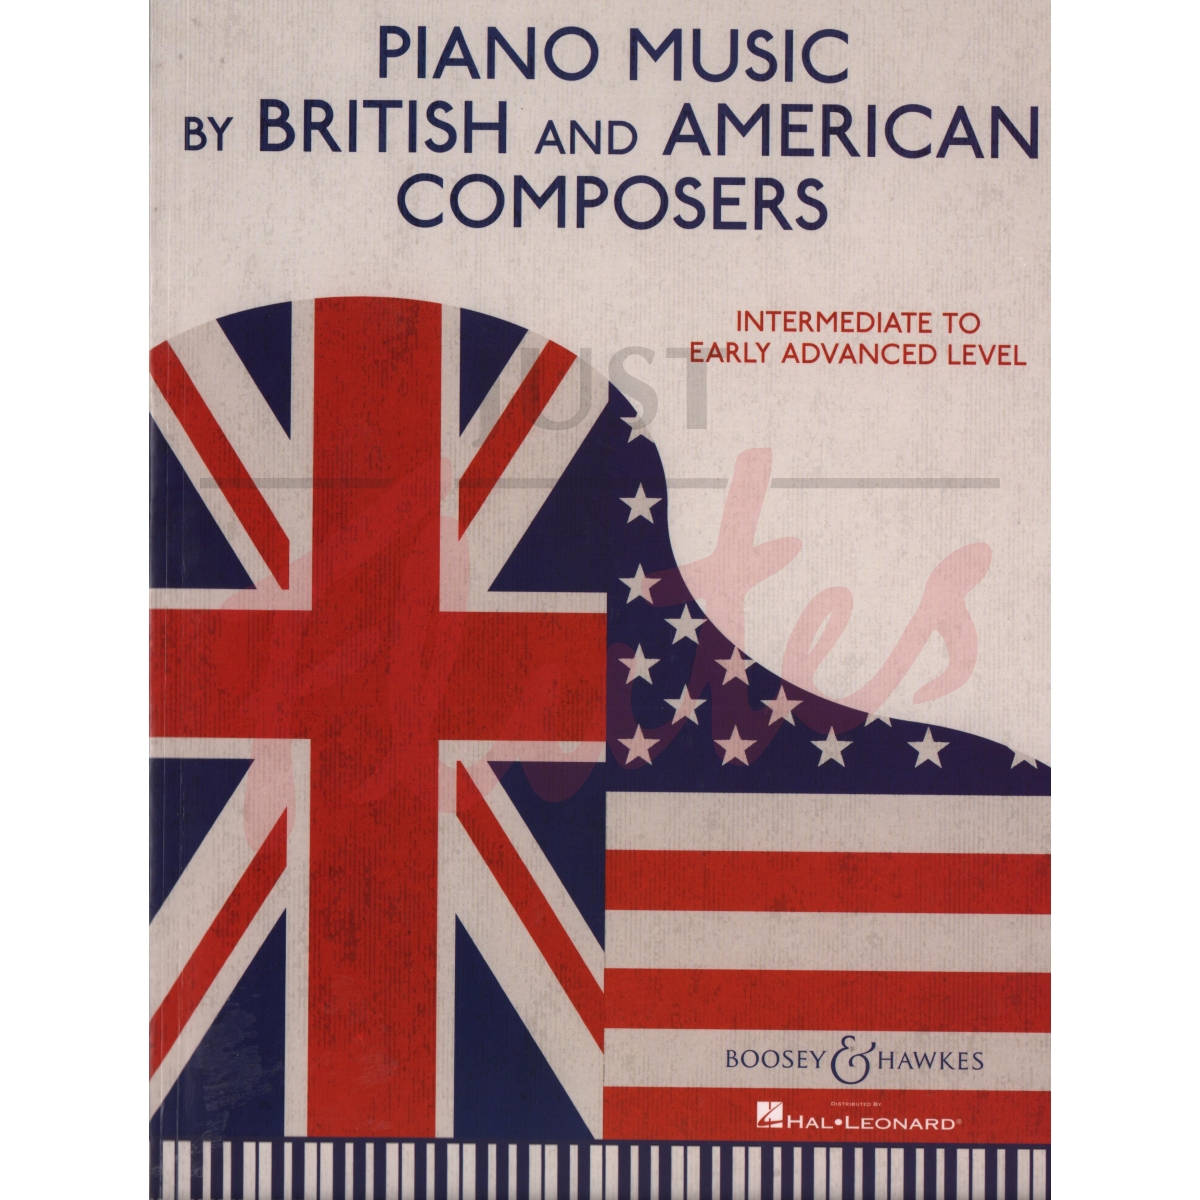 Piano Music by British and American Composers